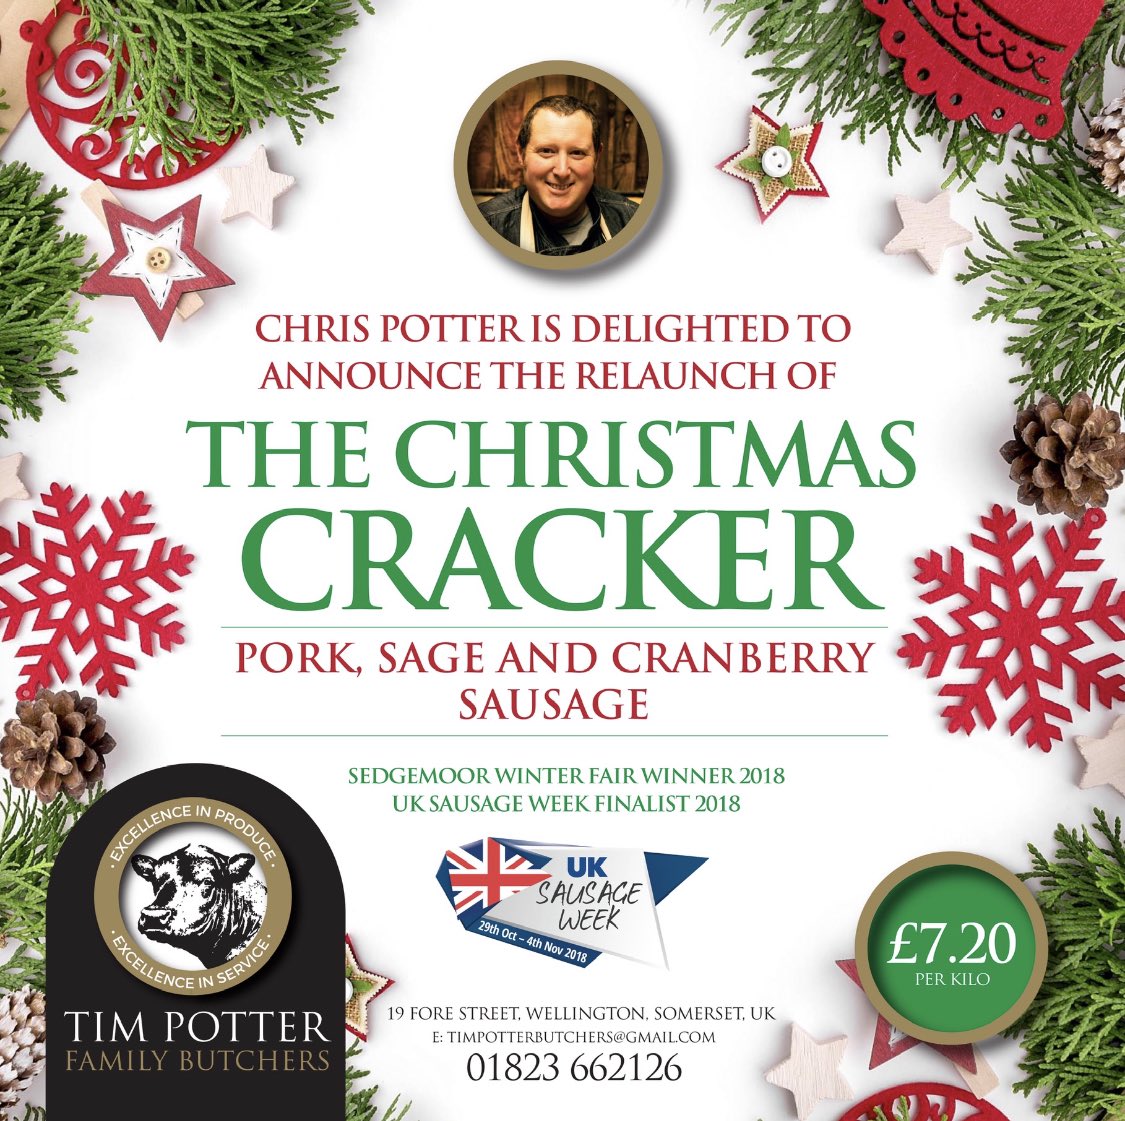 #FestiveFriday Due to popular demand, the multi-award-winning **CHRISTMAS CRACKER** is back!! Pop into the shop today and grab some for dinner! See our full range of sausages on the website: timpotterbutchers.co.uk/product-catego…